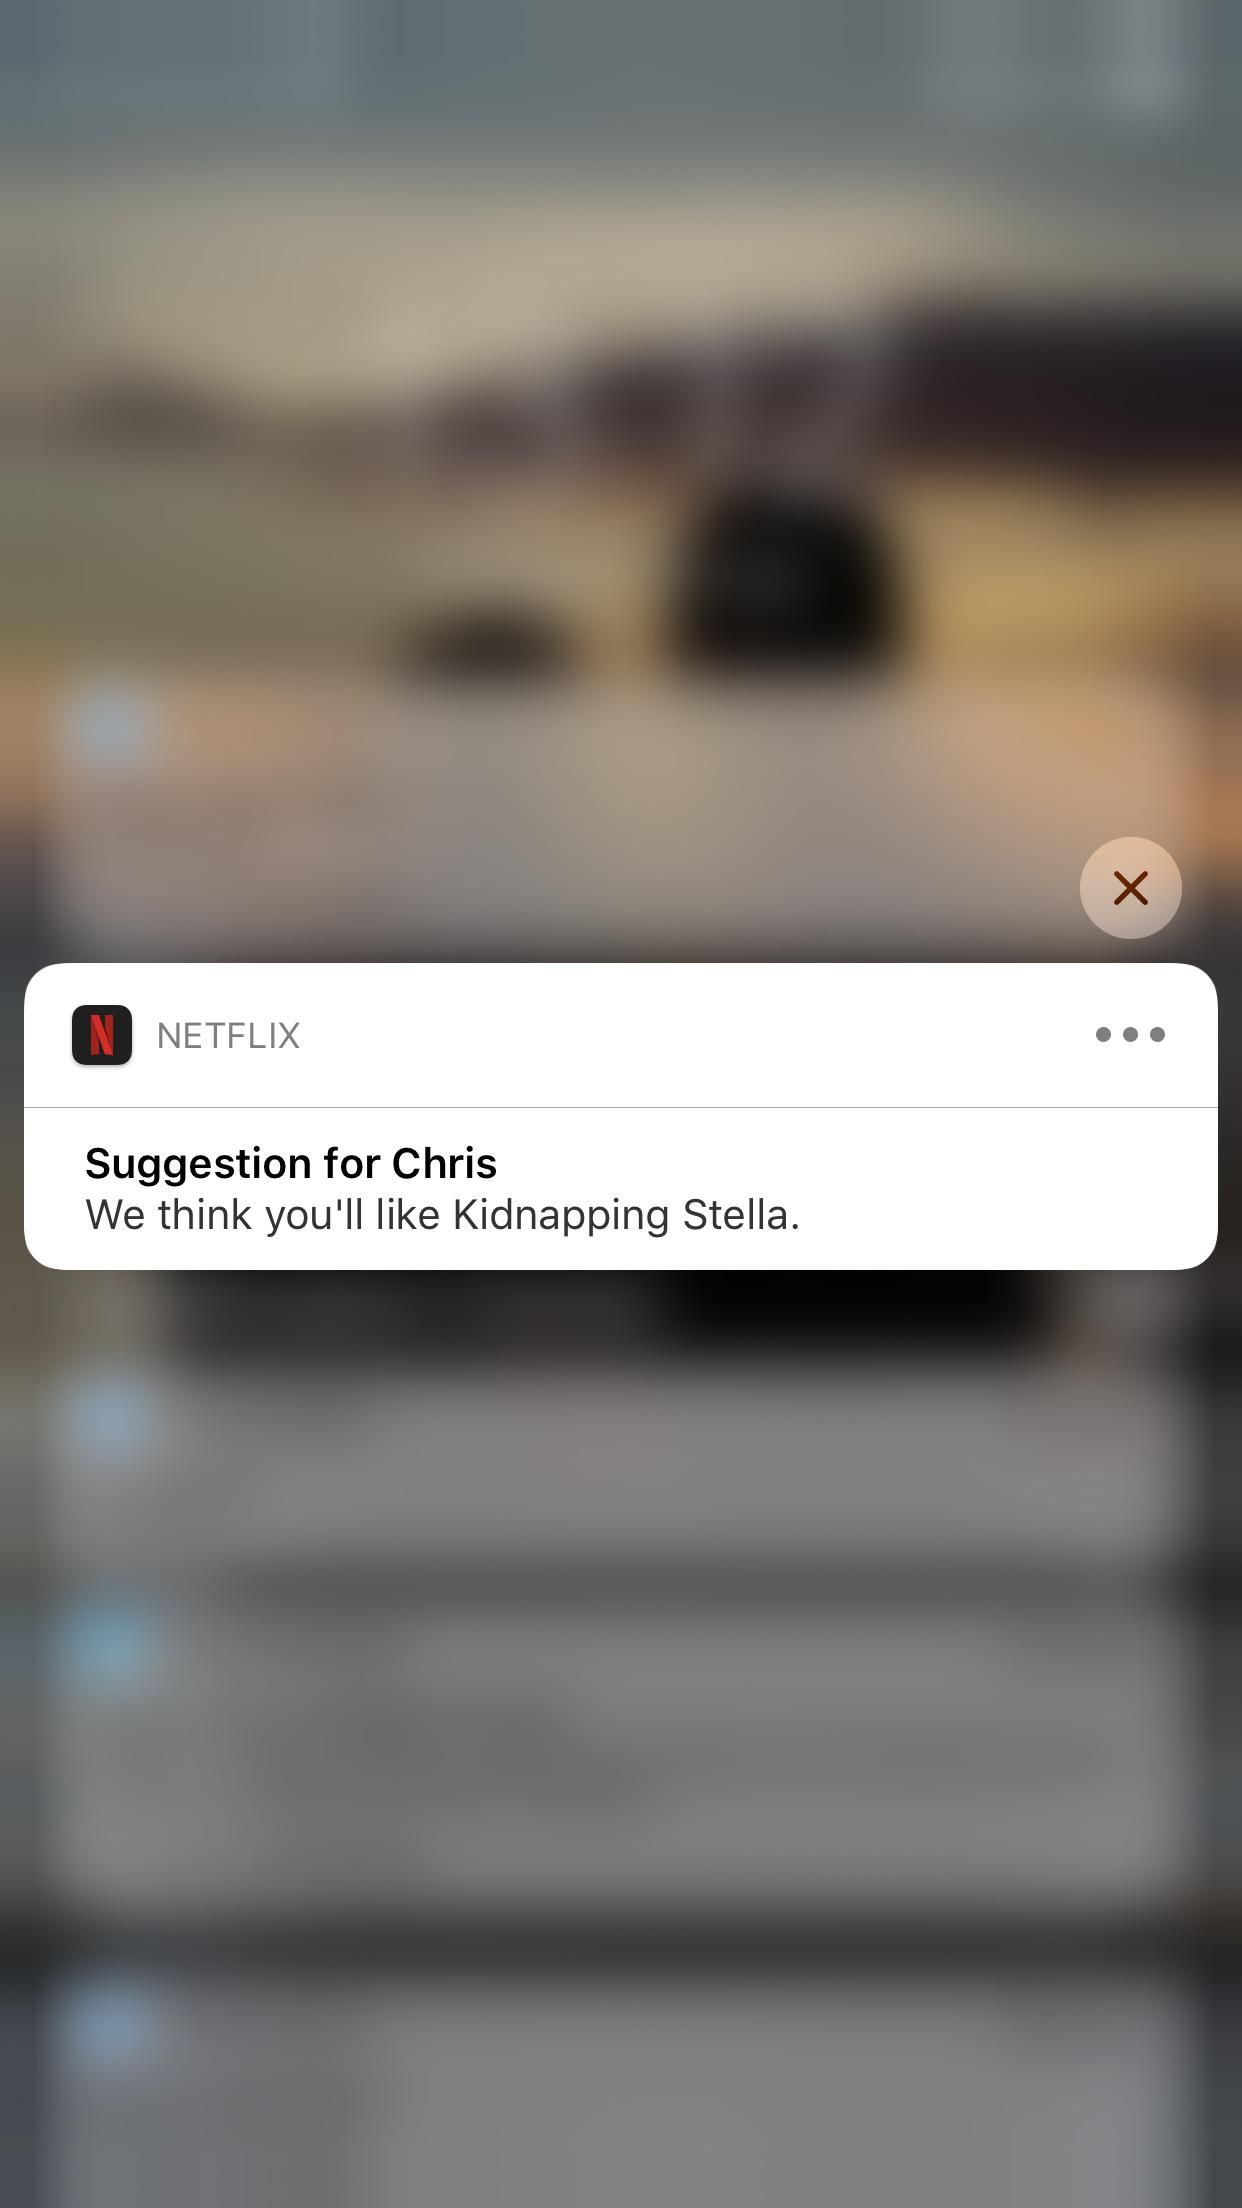 That's quite an assumption you've made there, Netflix